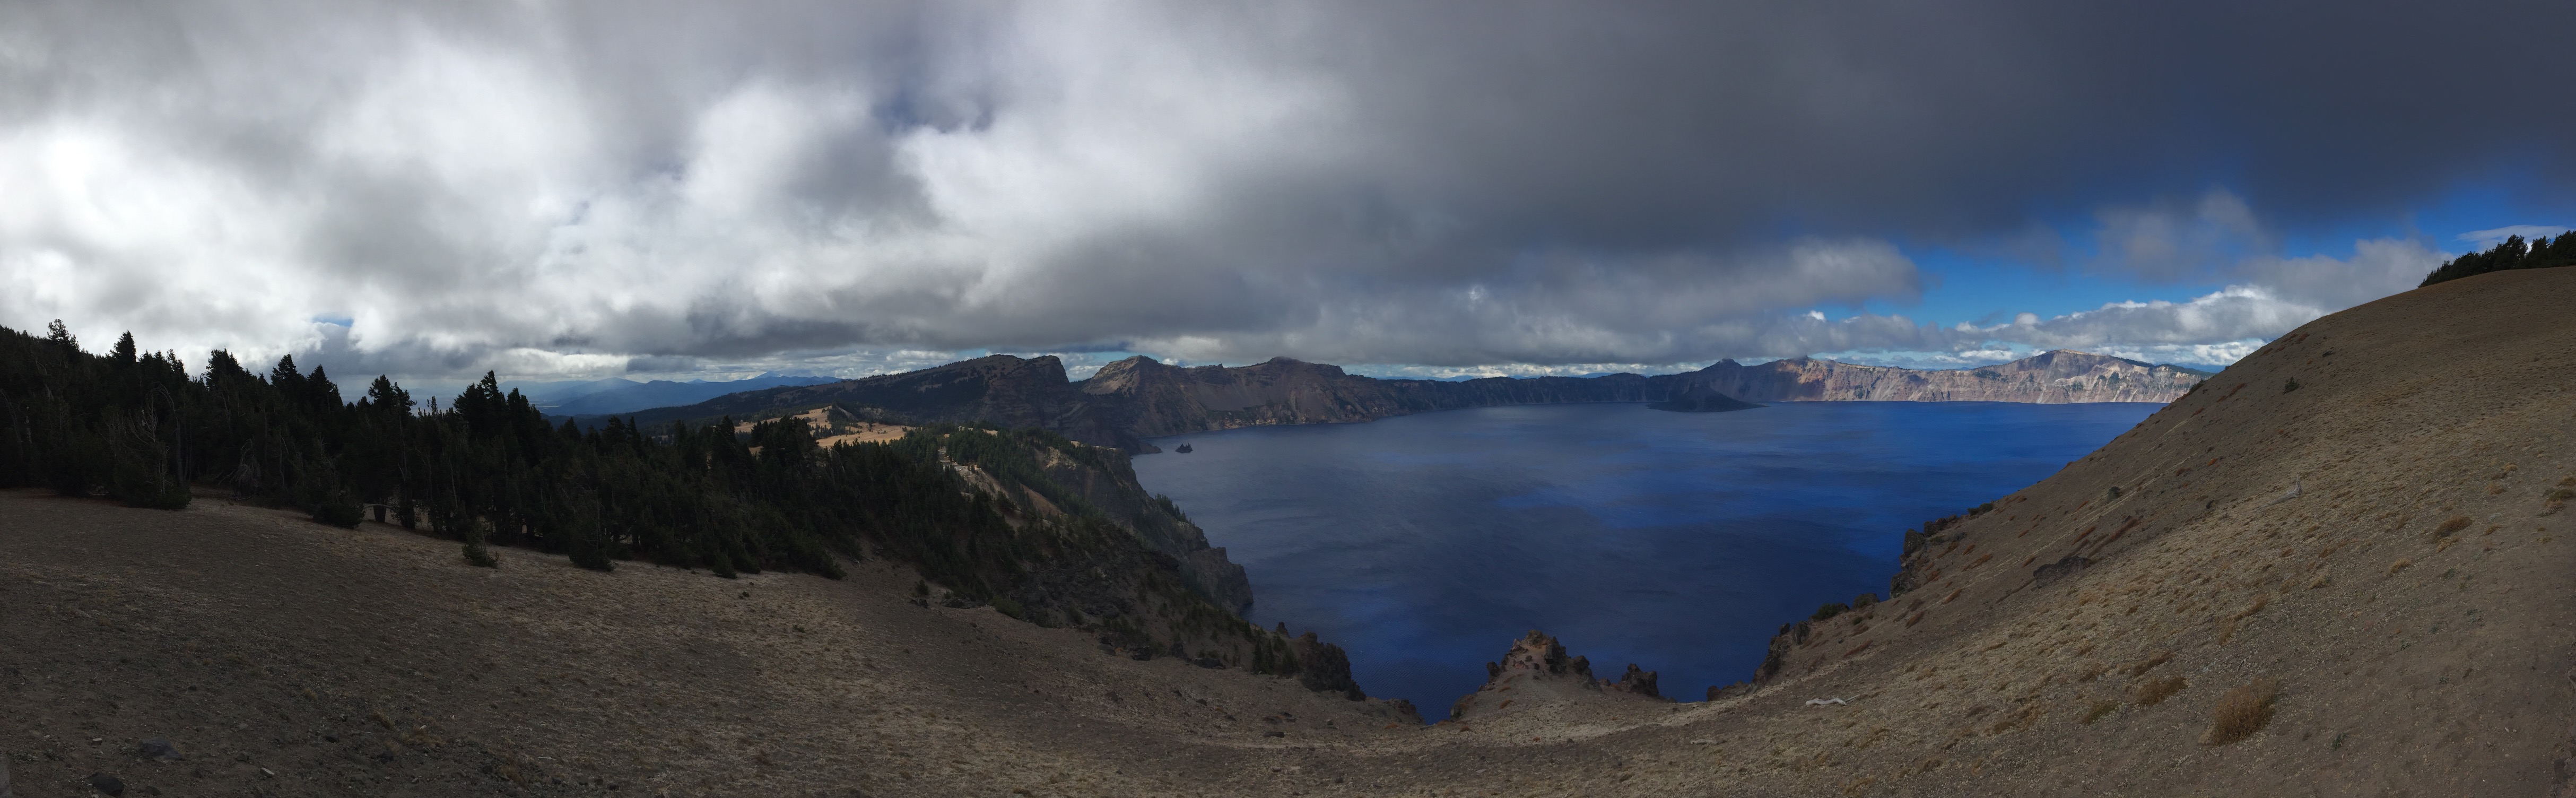 A panorama of the deep-blue Crater Lake and the ominous clouds above.